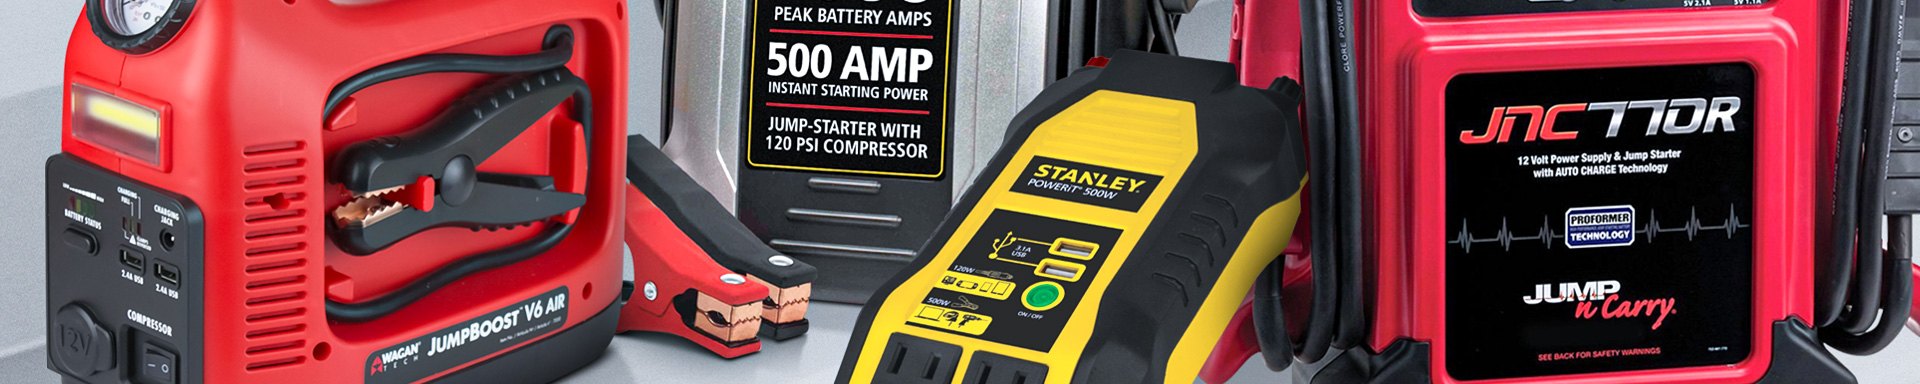 Solar Battery Chargers & Jump Starters